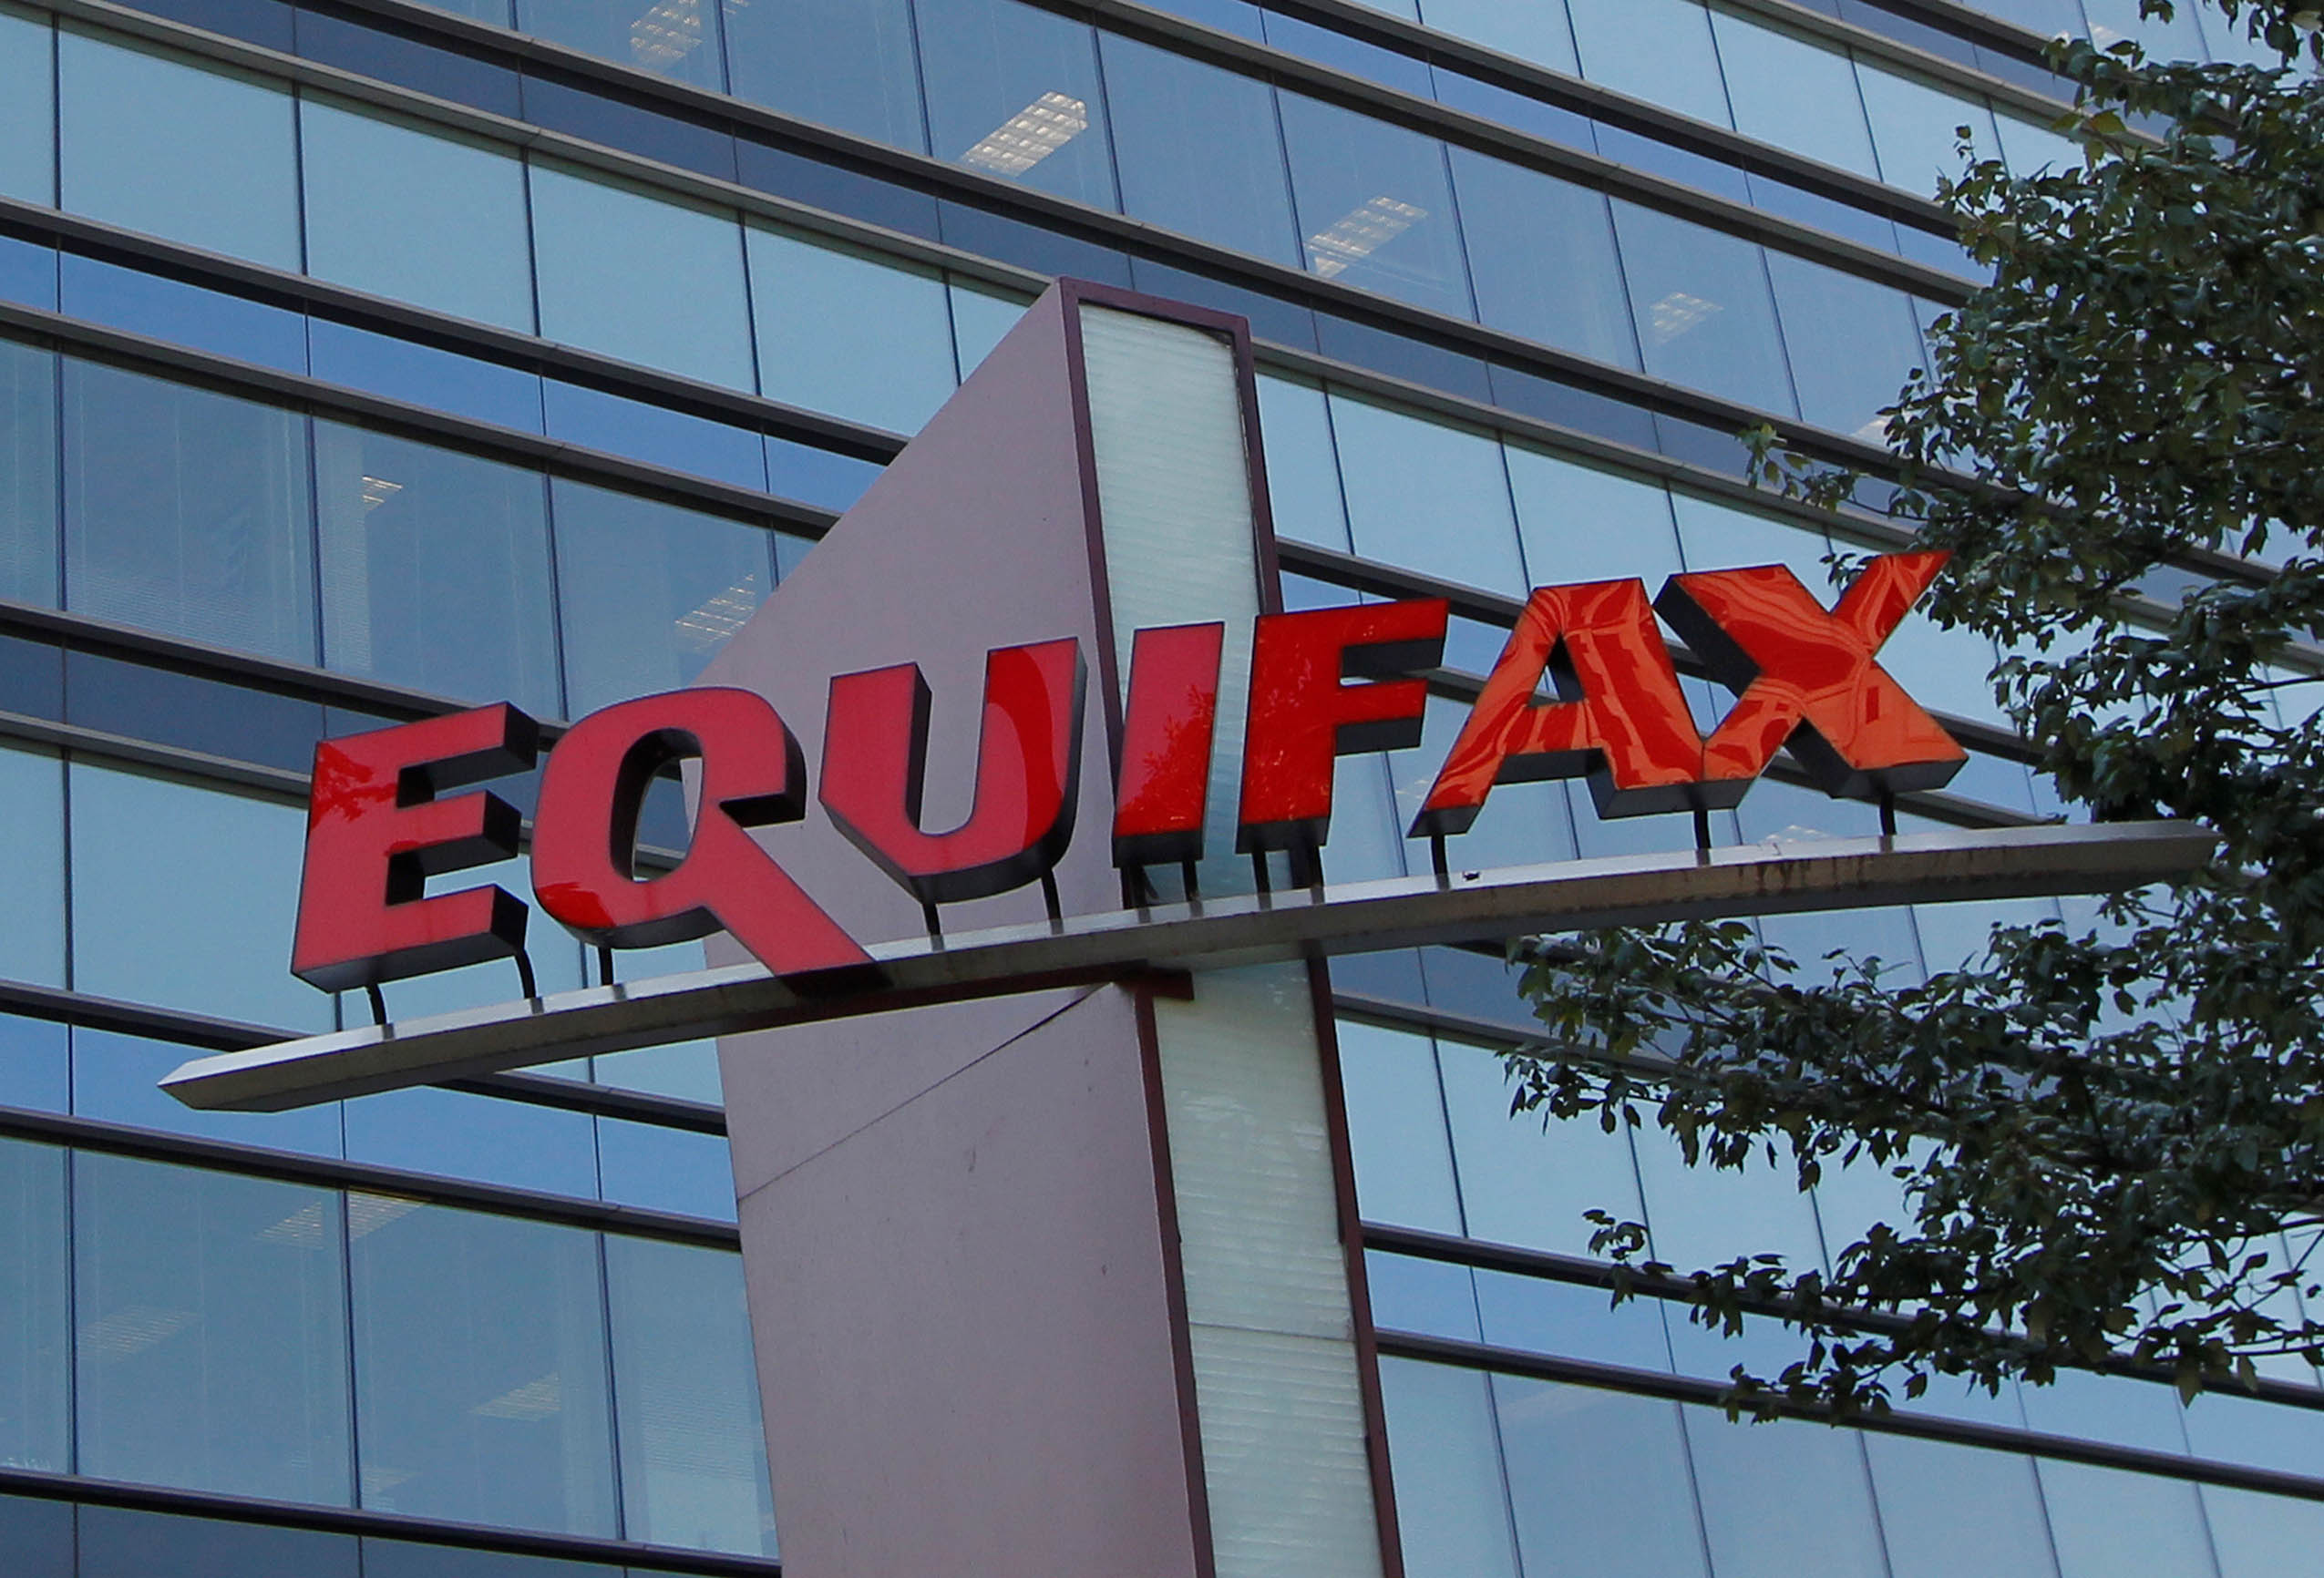 Former Equifax CEO says breach boiled down to one person not doing their job